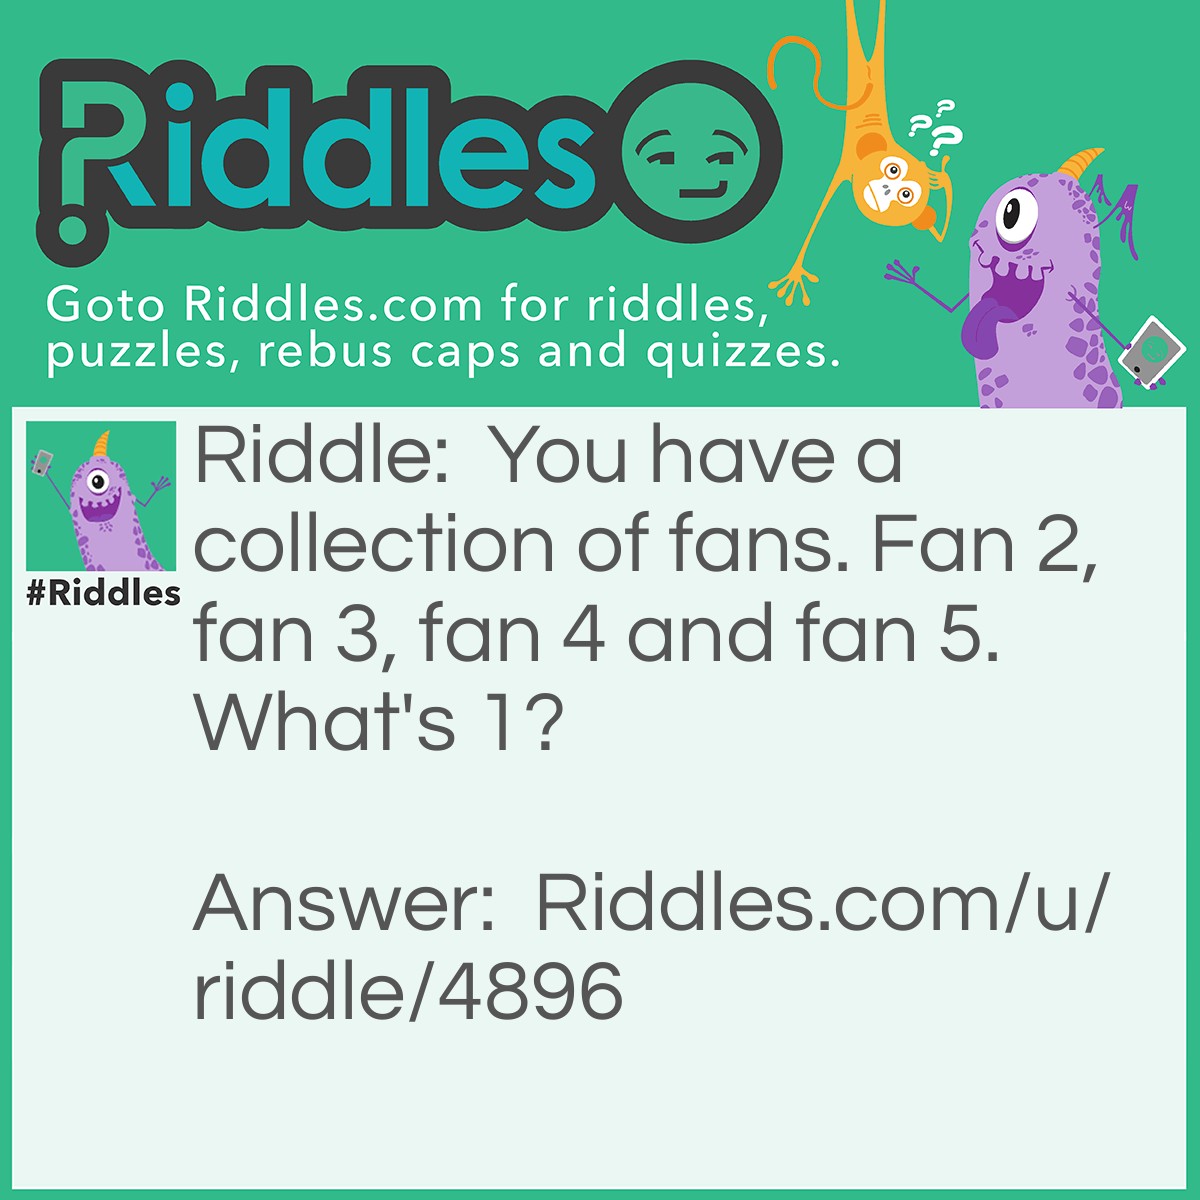 Riddle: You have a collection of fans. Fan 2, fan 3, fan 4 and fan 5. What's 1? Answer: It's your number one fan.